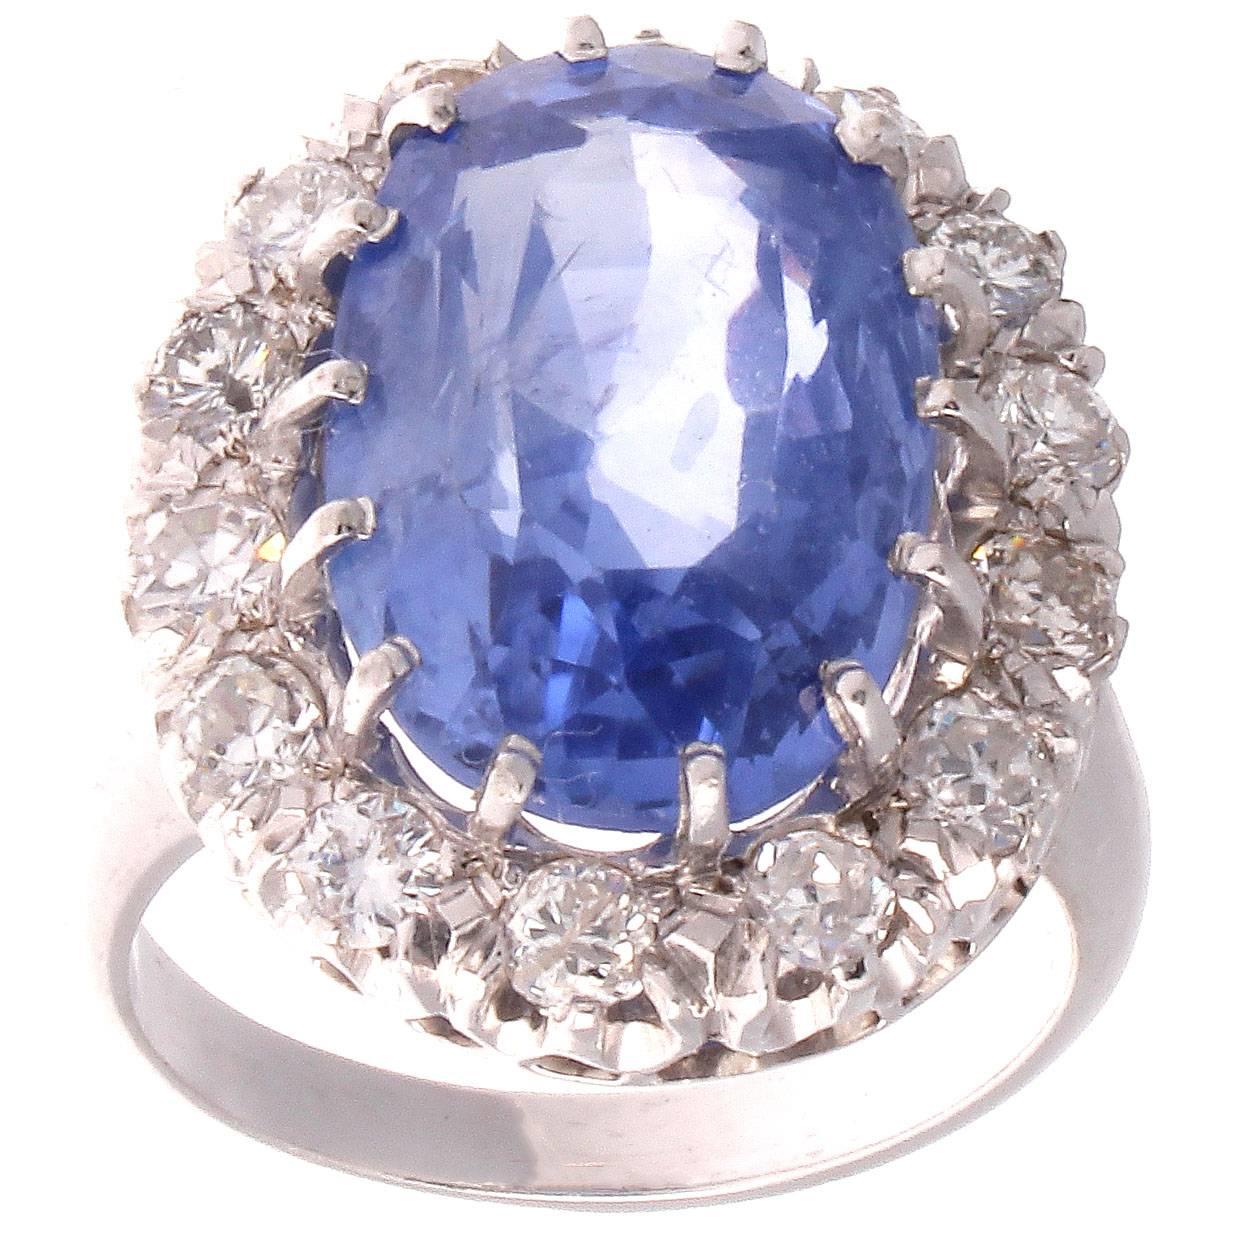 The classic Sapphire engagement ring. Featuring a 12.55 carat cornflower blue sapphire that is accompanied with a Guild Laboratories certificate stating it is of Ceylon origin with no indications of heat or other treatment. Surrounded by a halo of